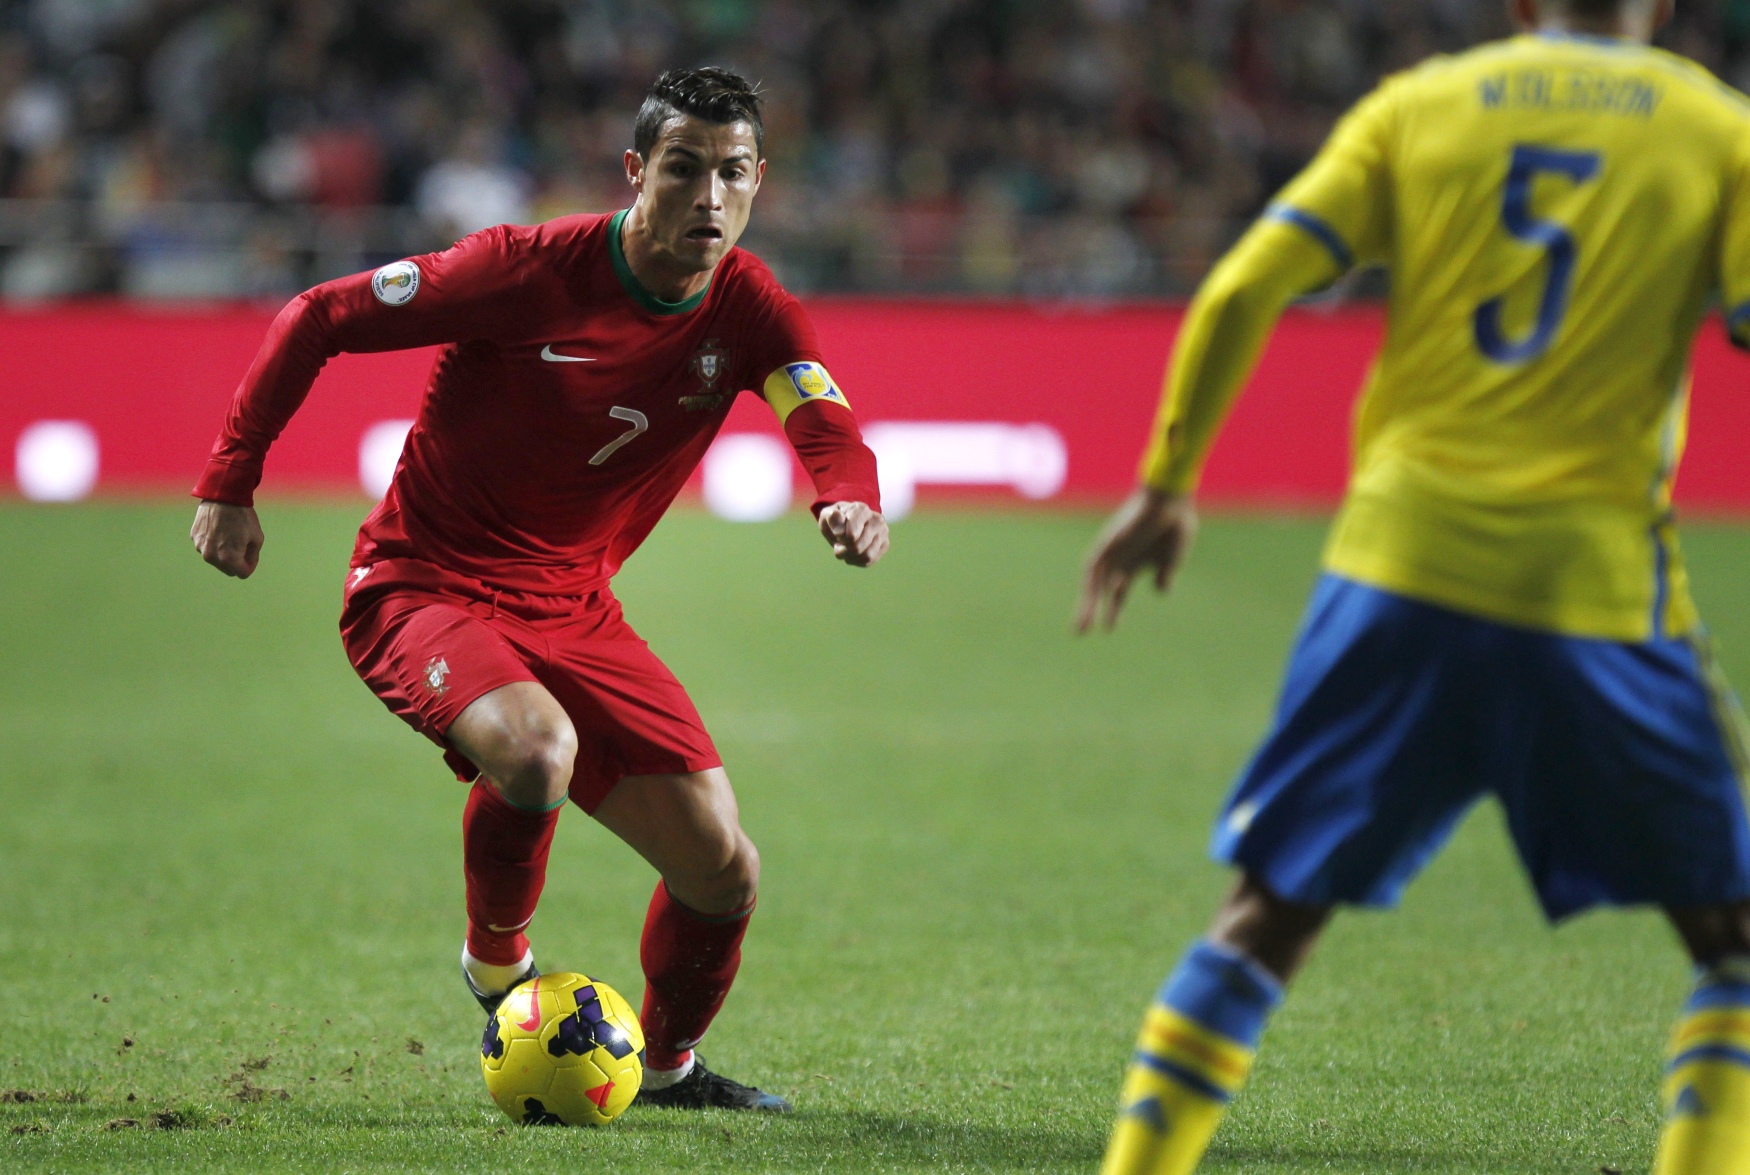 Cristiano Ronaldo runs with the ball next to Sweden's Martin Olsson, during the match between Portugal and Sweden in Lisbon. Photo: AP